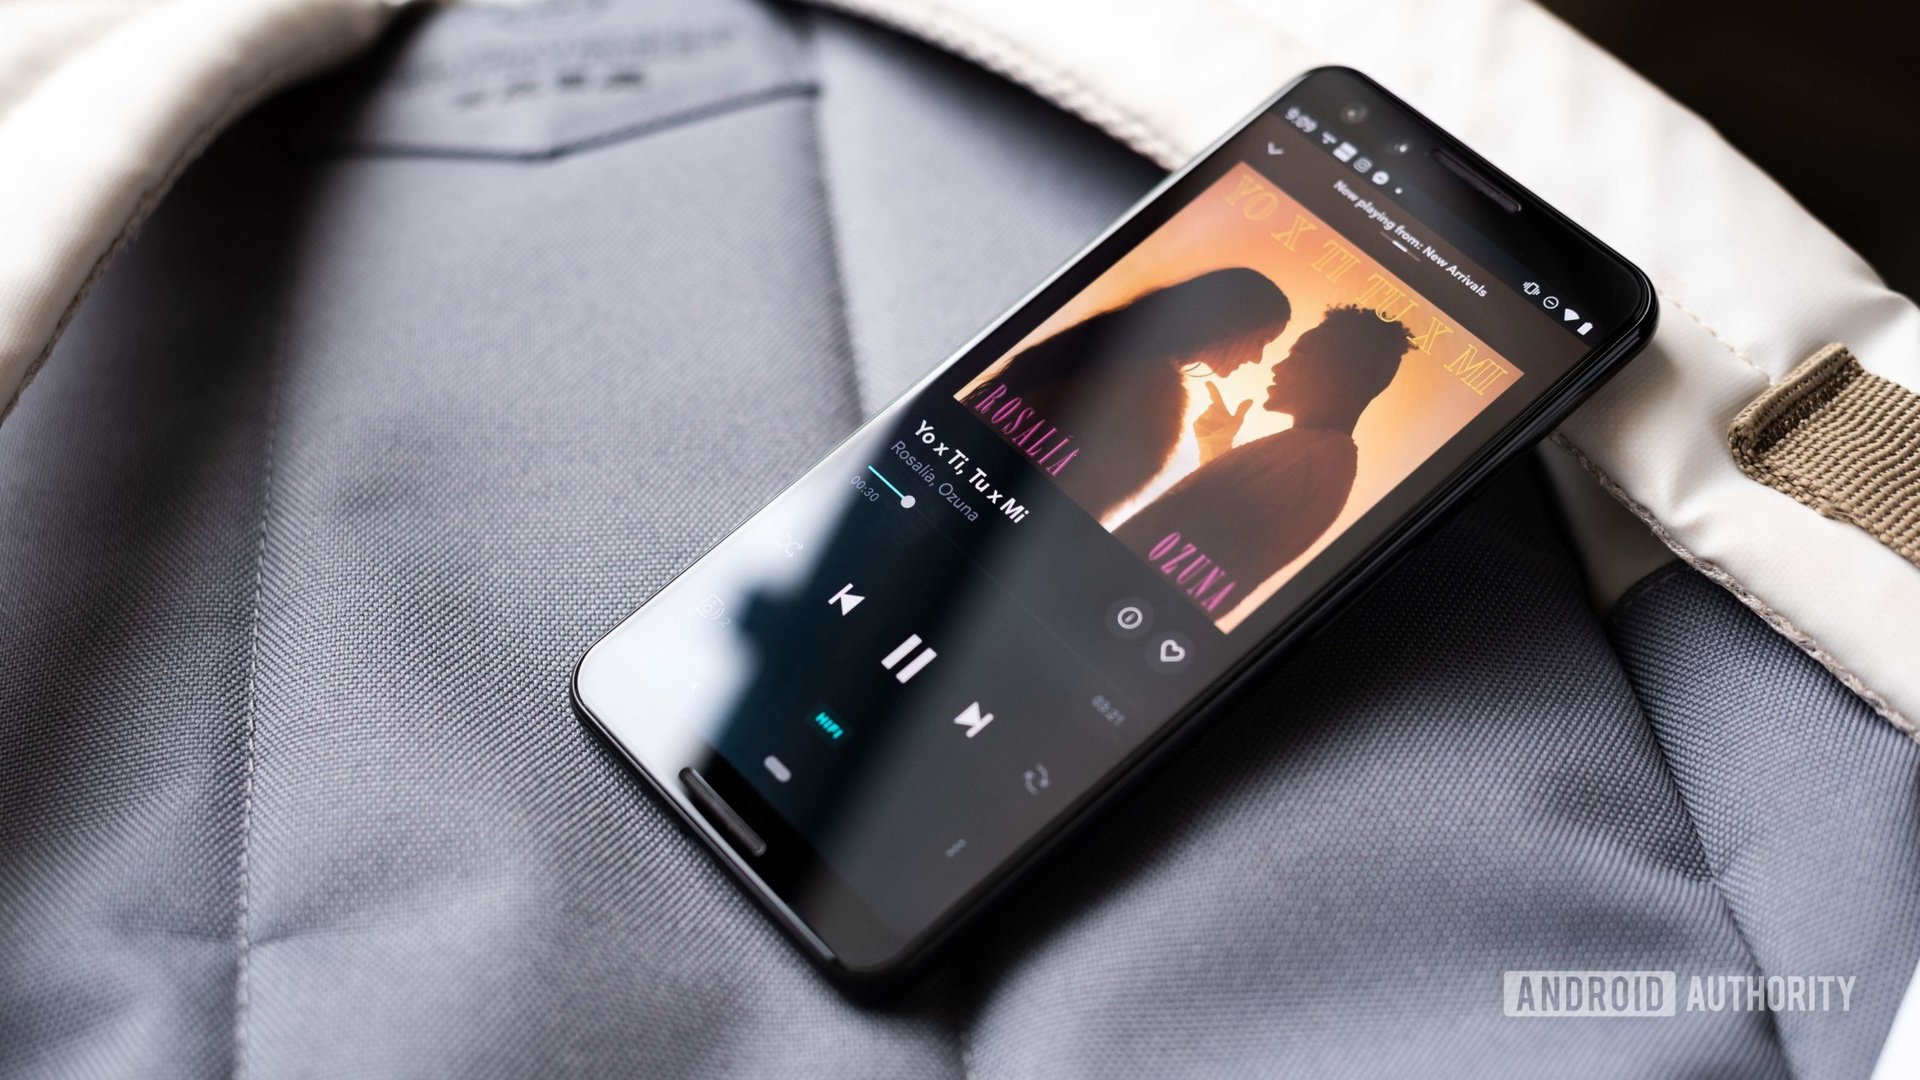 Tidal music player is a solid Spotify alternative.